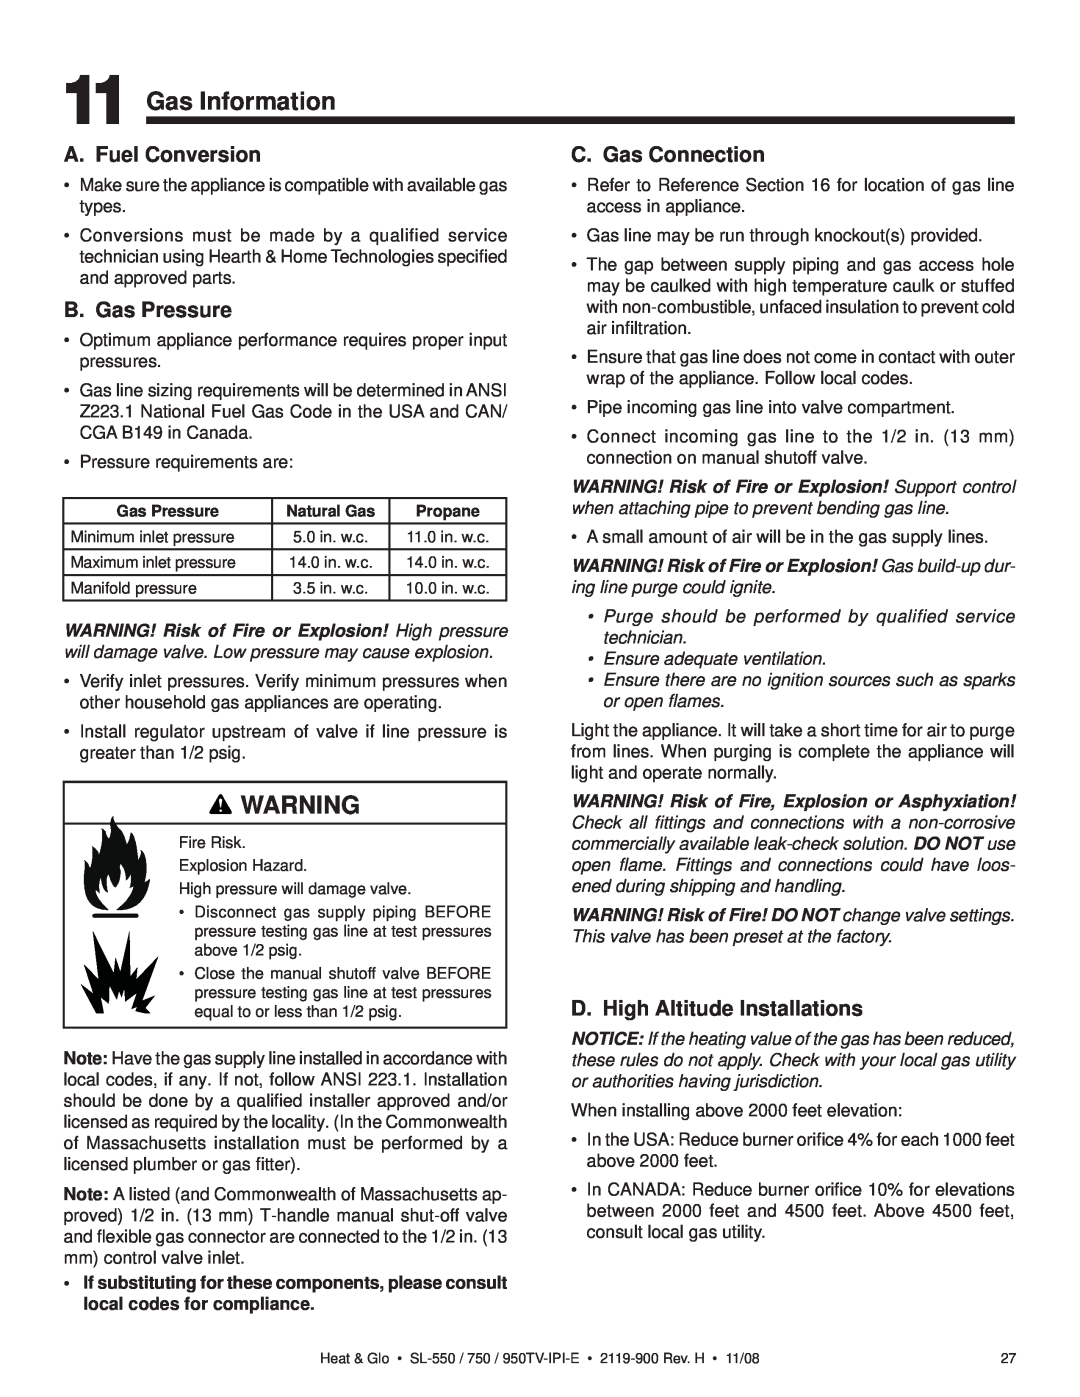 Hearth and Home Technologies SL-750TV-IPI-E Gas Information, A. Fuel Conversion, B. Gas Pressure, C. Gas Connection 